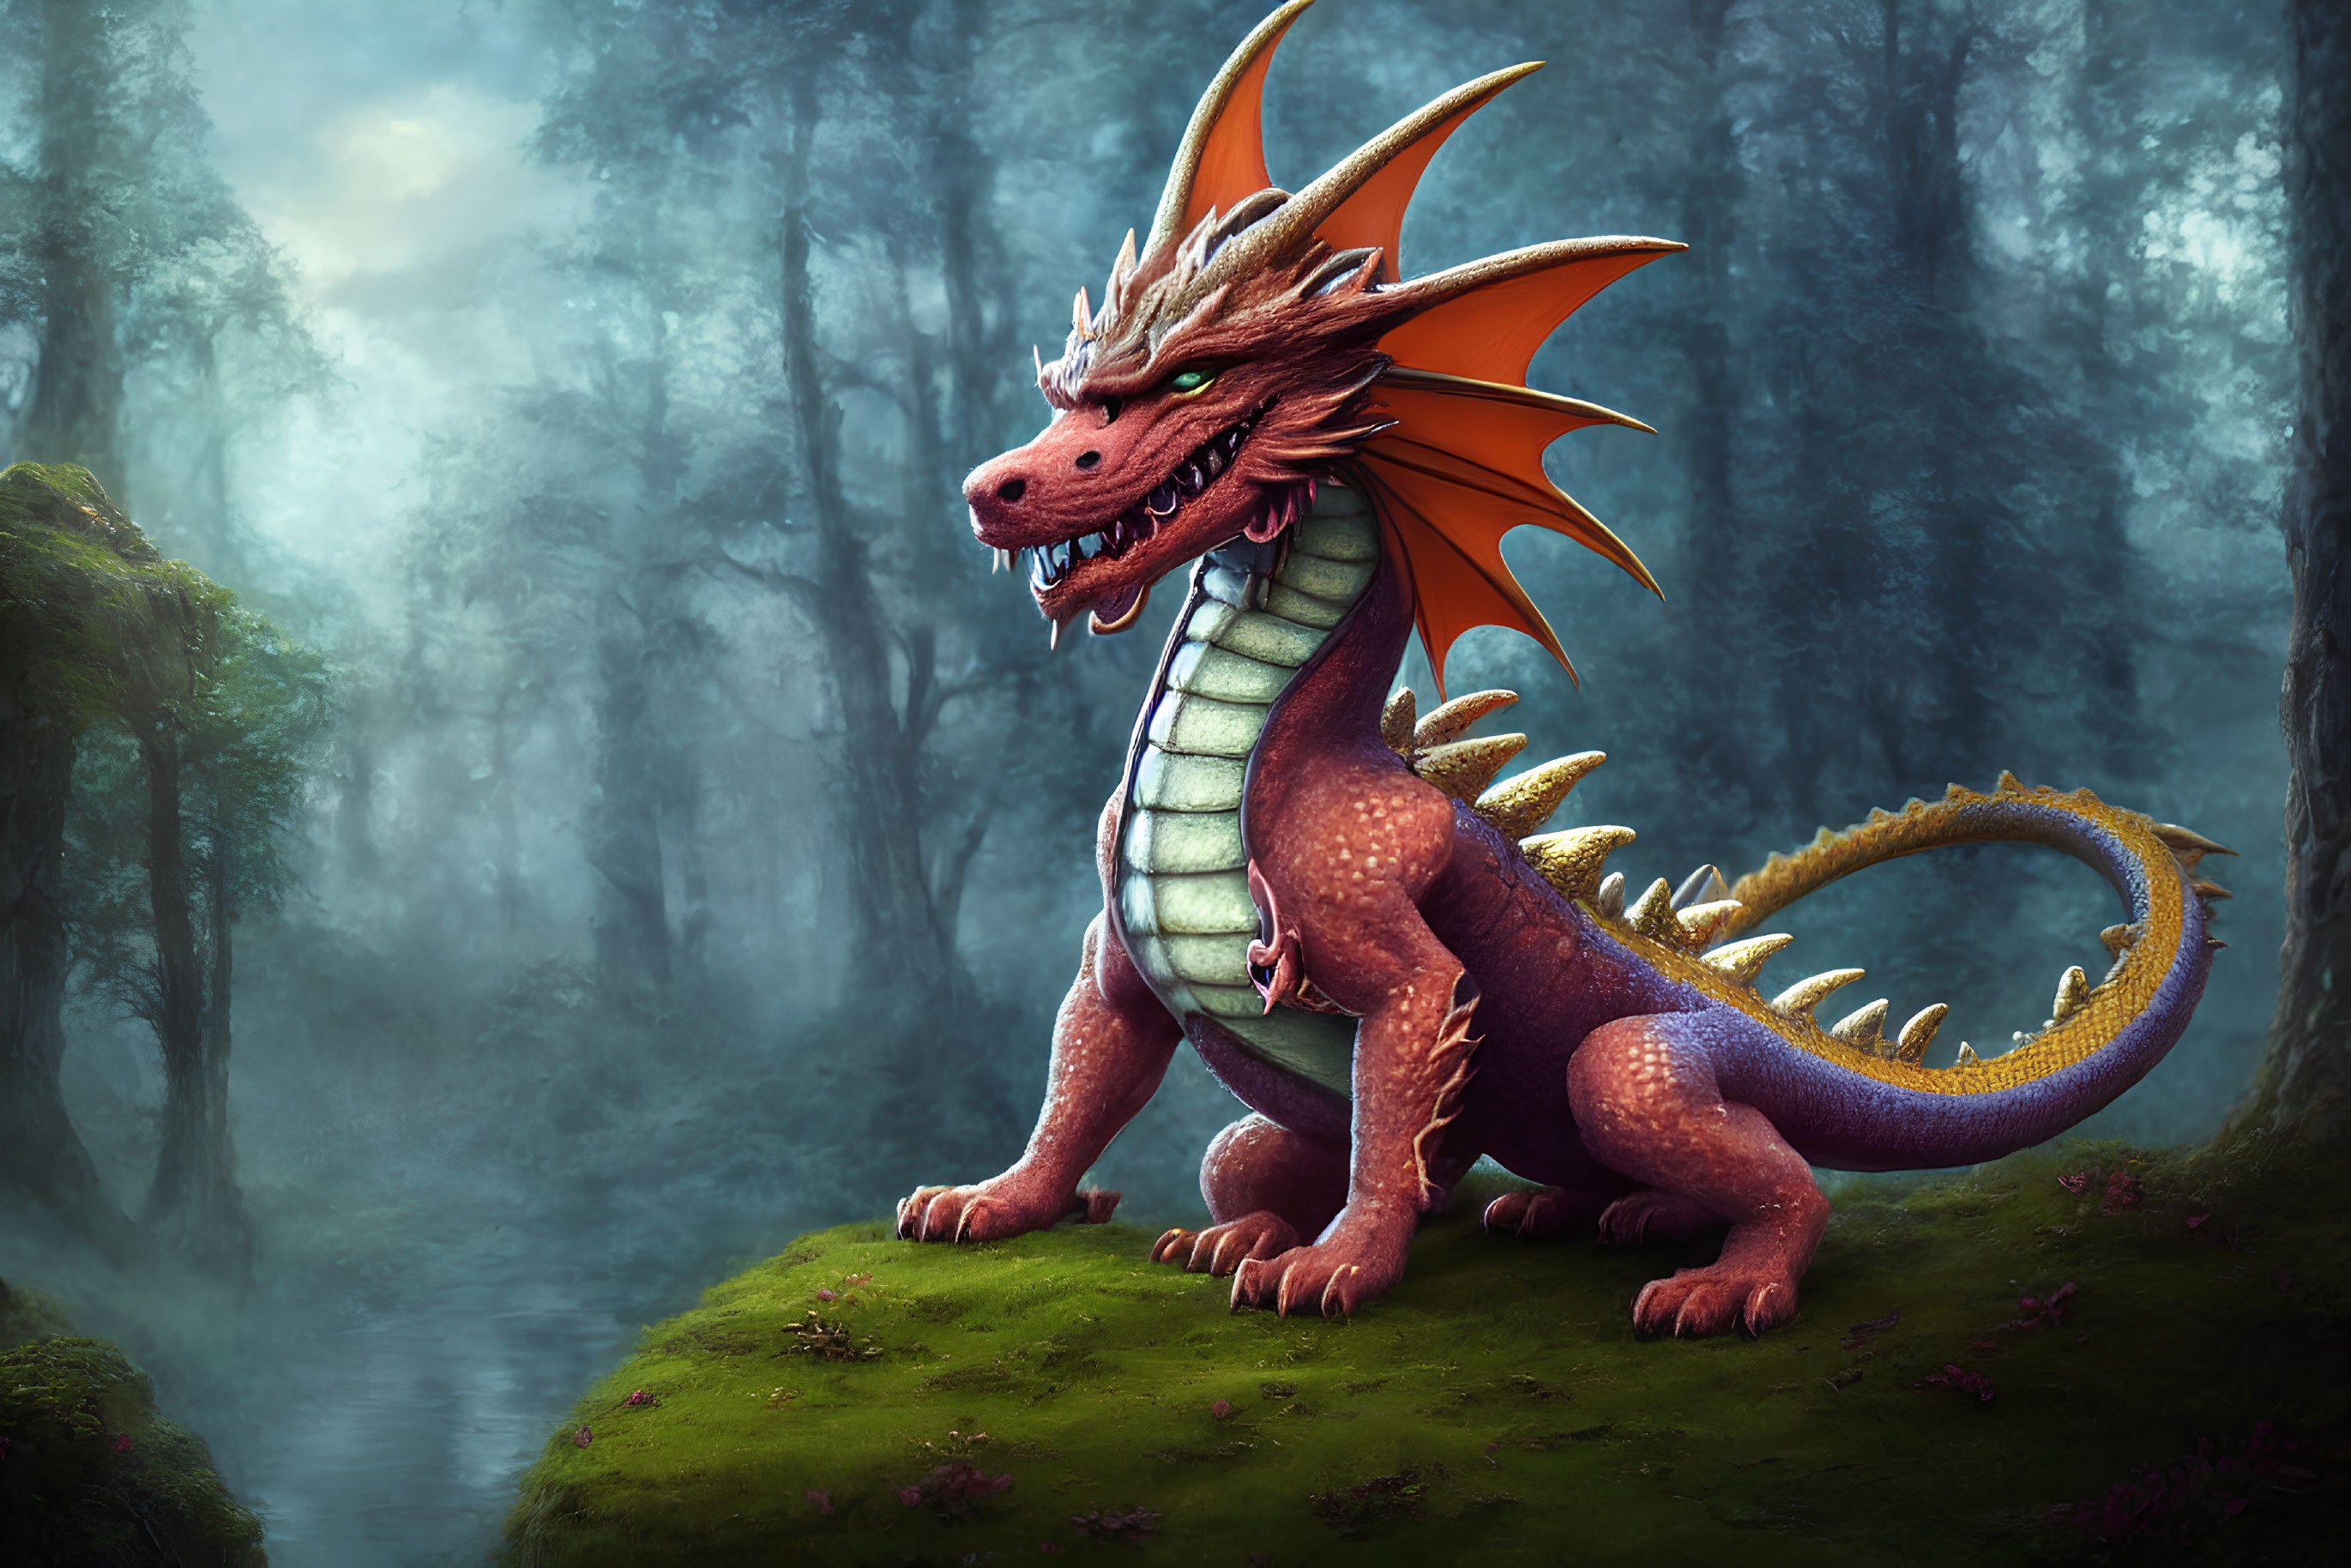 Majestic red dragon with orange spikes in mystic forest with swirling fog